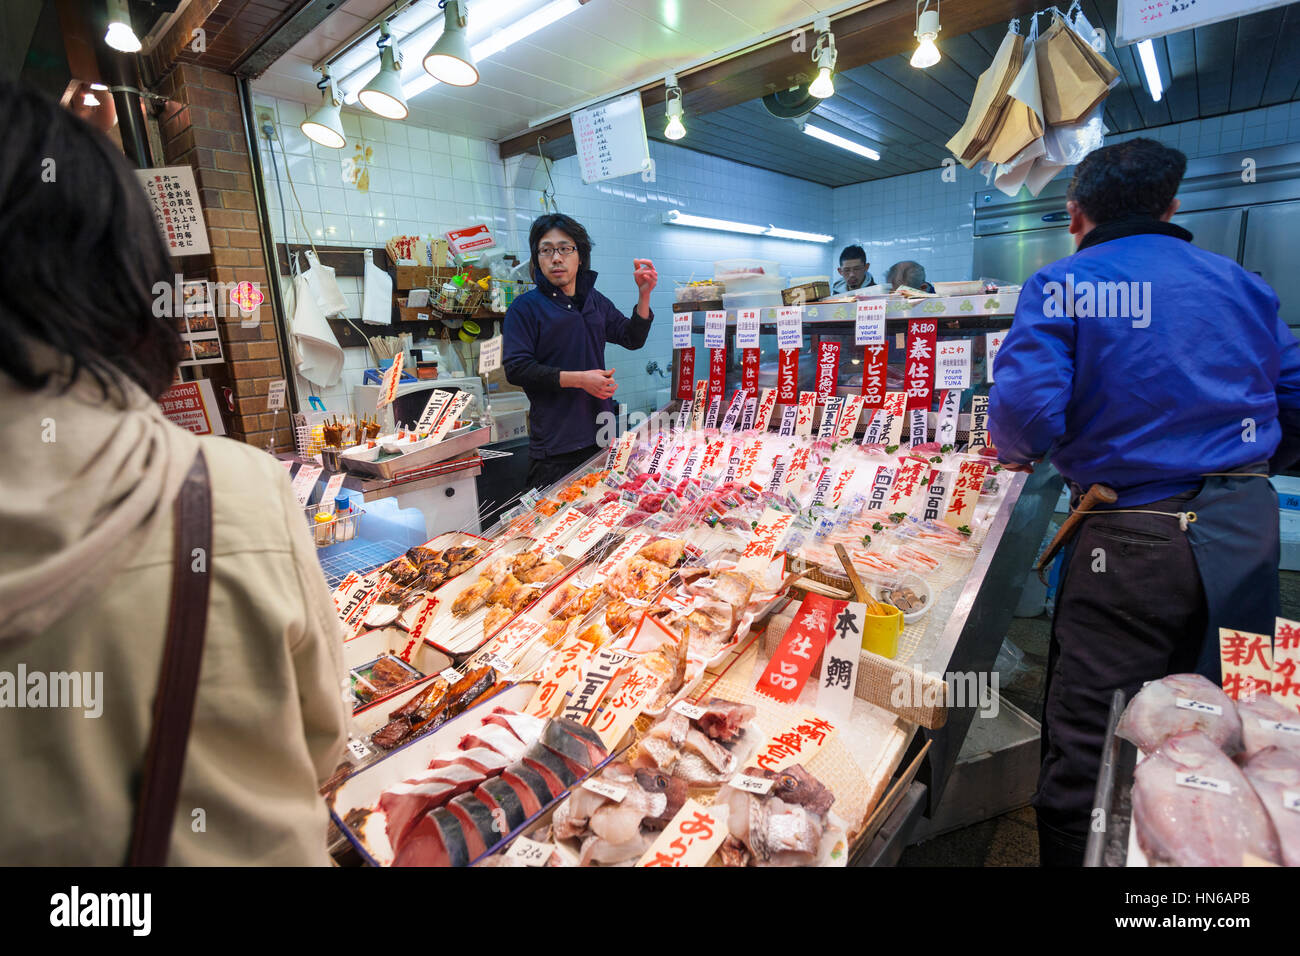 KYOTO, JAPAN - MARCH 23: Staff and customers at a stall selling fish in Nishiki food market in Central Kyoto on 23rd March 2012. Stock Photo